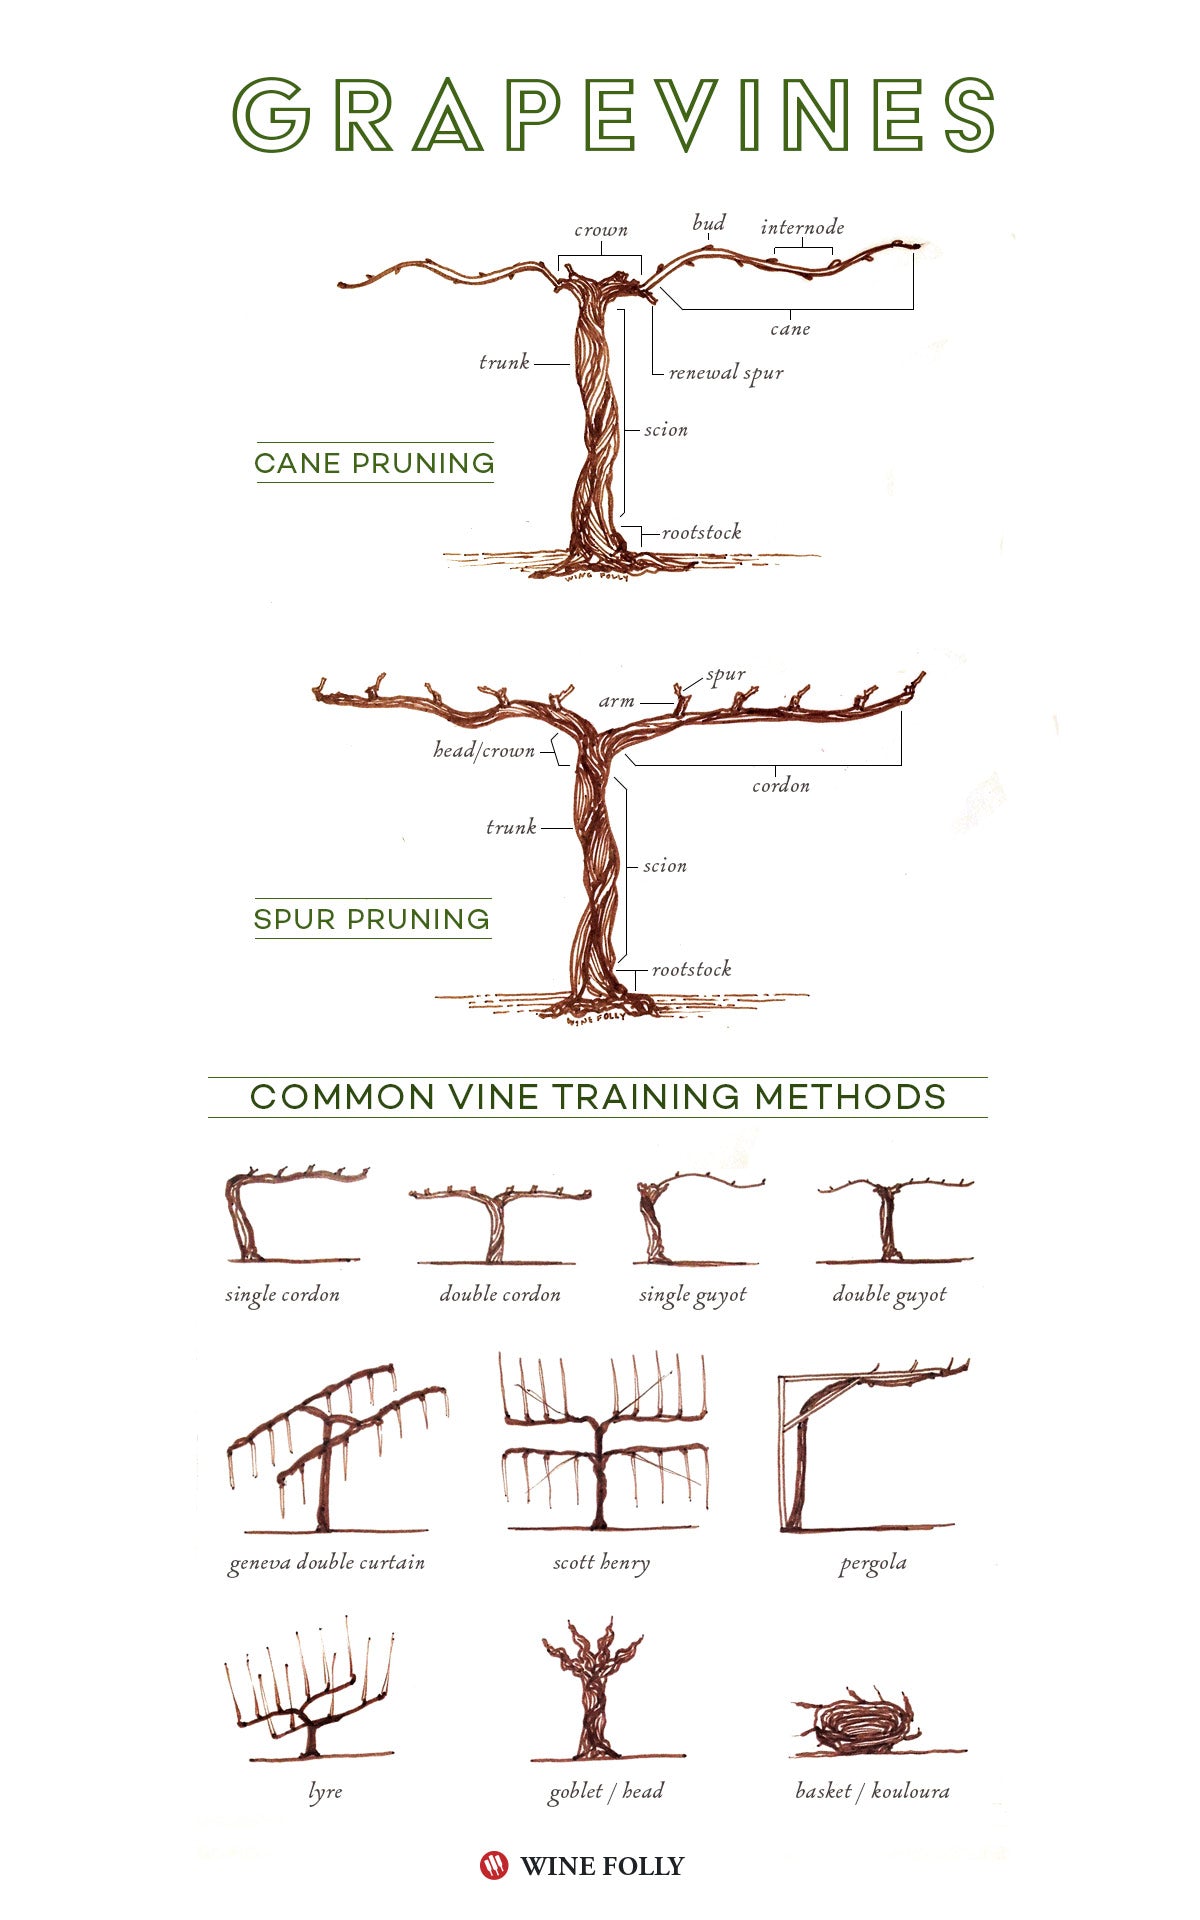 parts-of-a-grapevine-training-methods_2048x2048.jpg